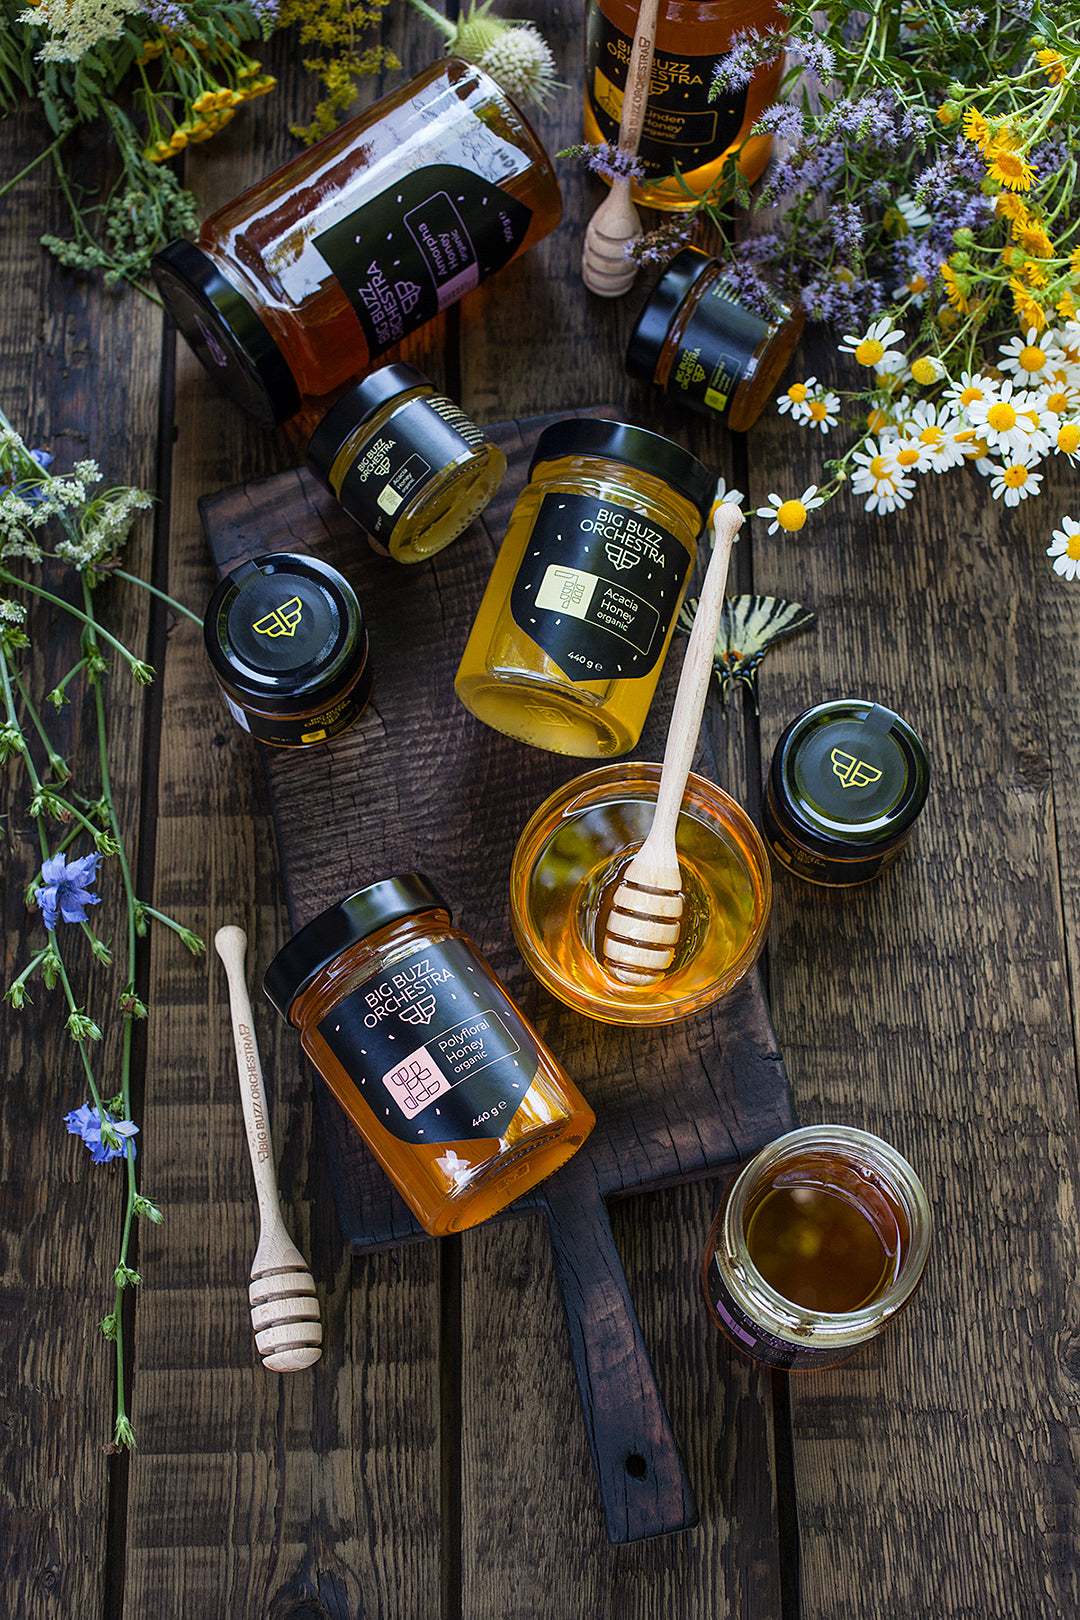 Best Alternative to Cough Syrup: Natural Honey